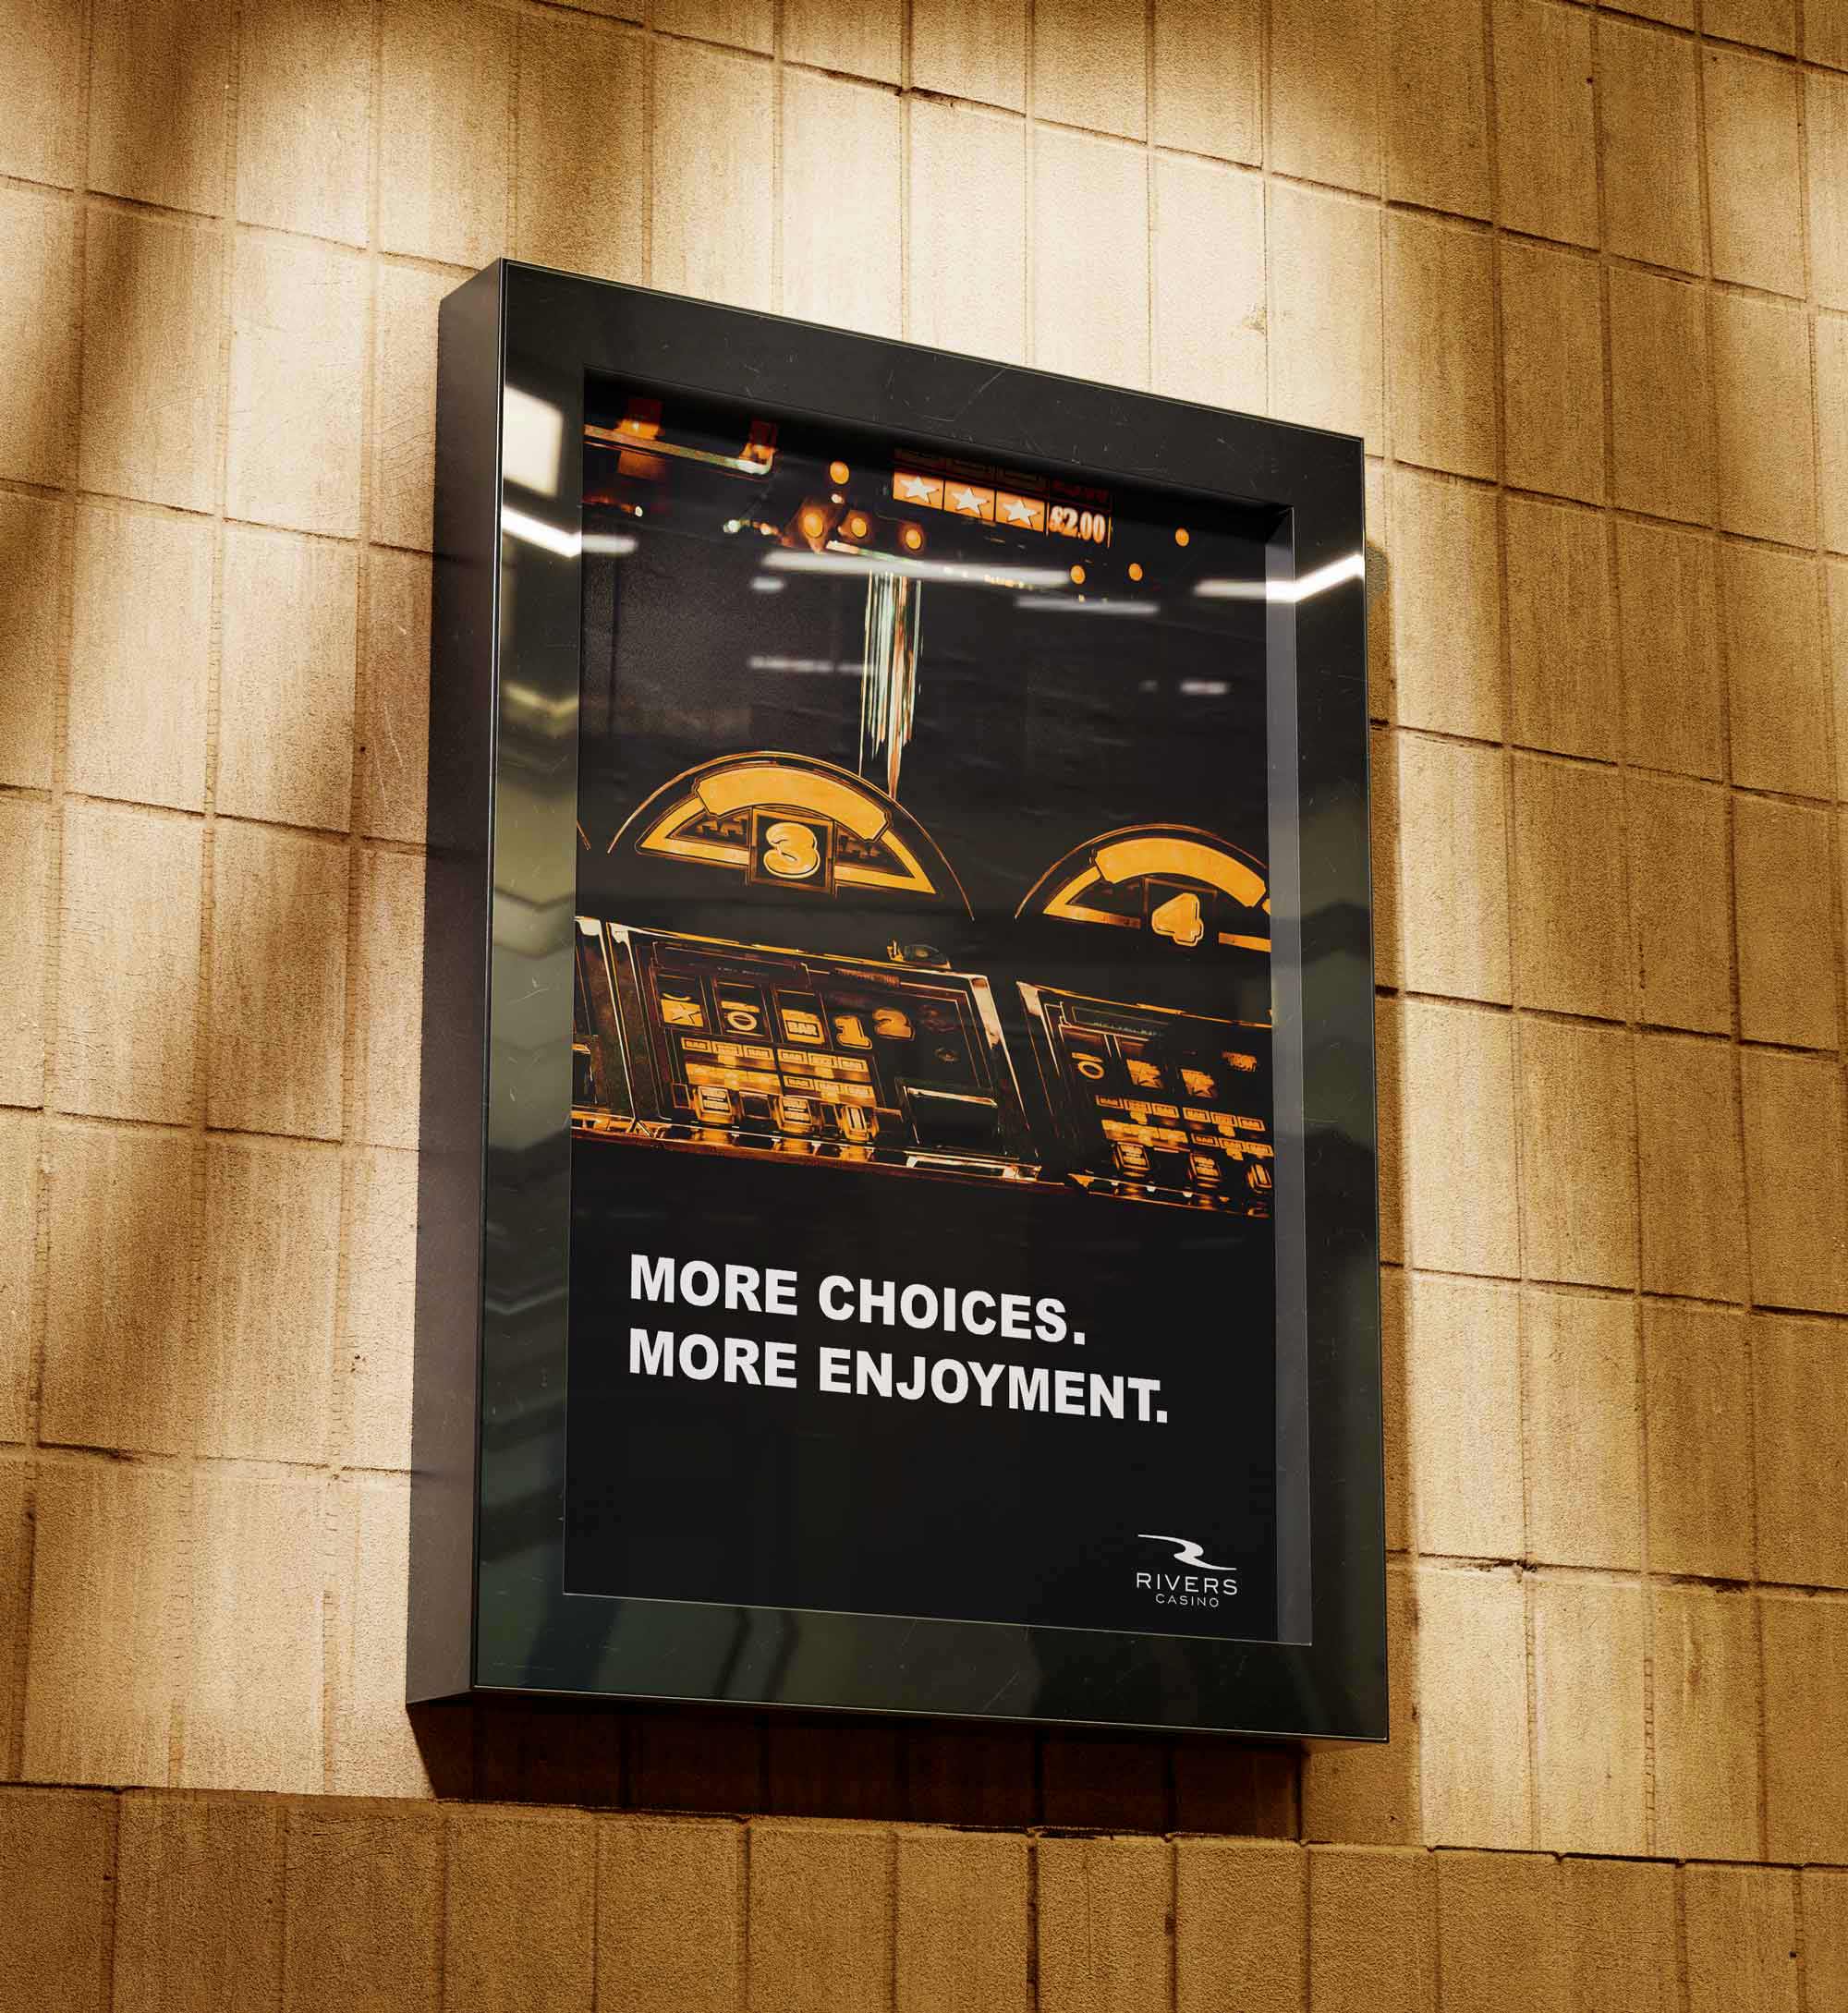 An ad inside of a building that reads "More Choices. More enjoyment."